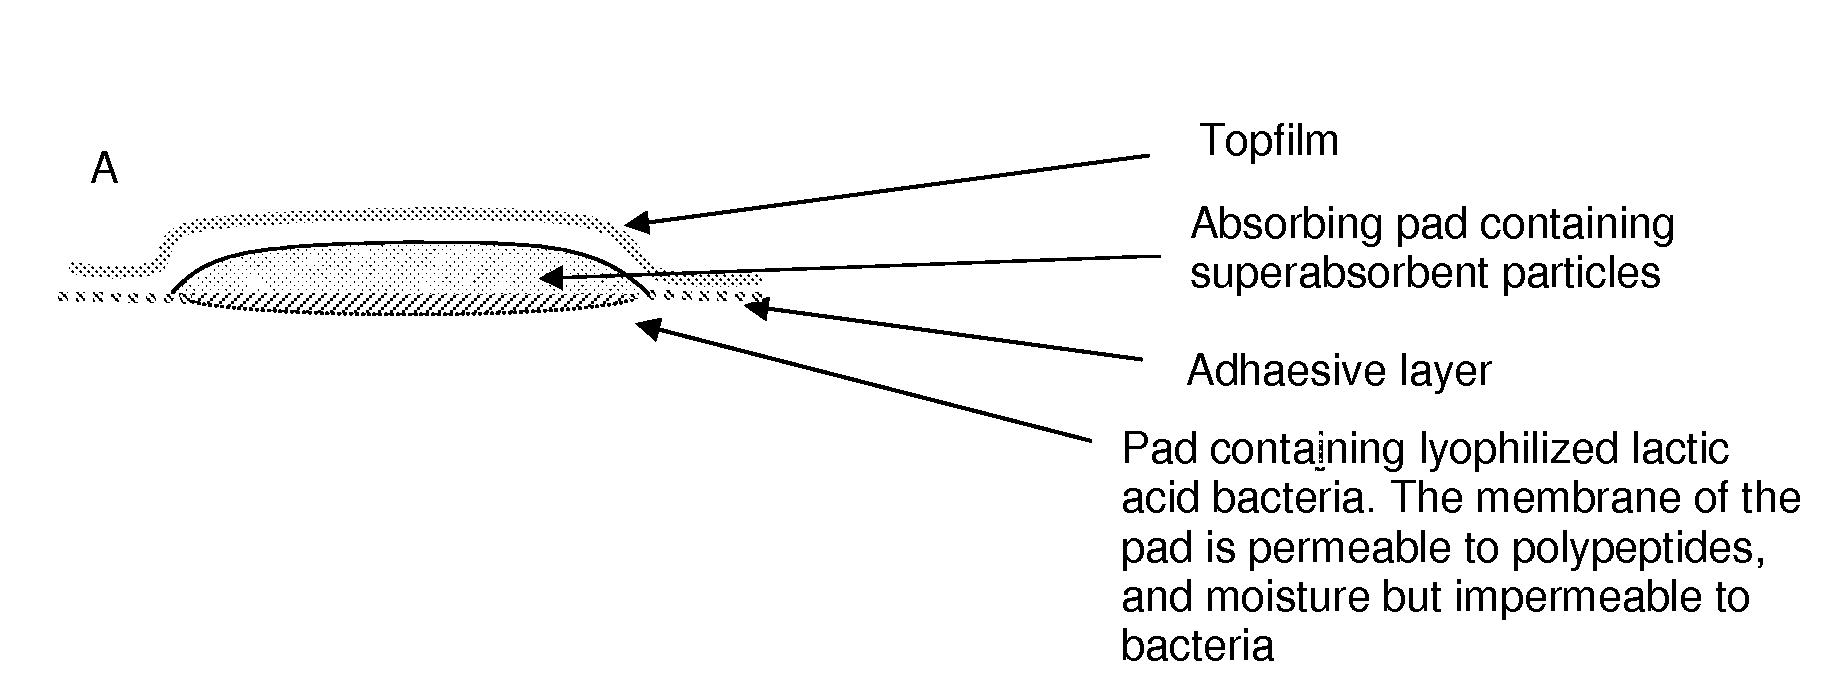 Wound or tissue dressing comprising lactic acid bacteria